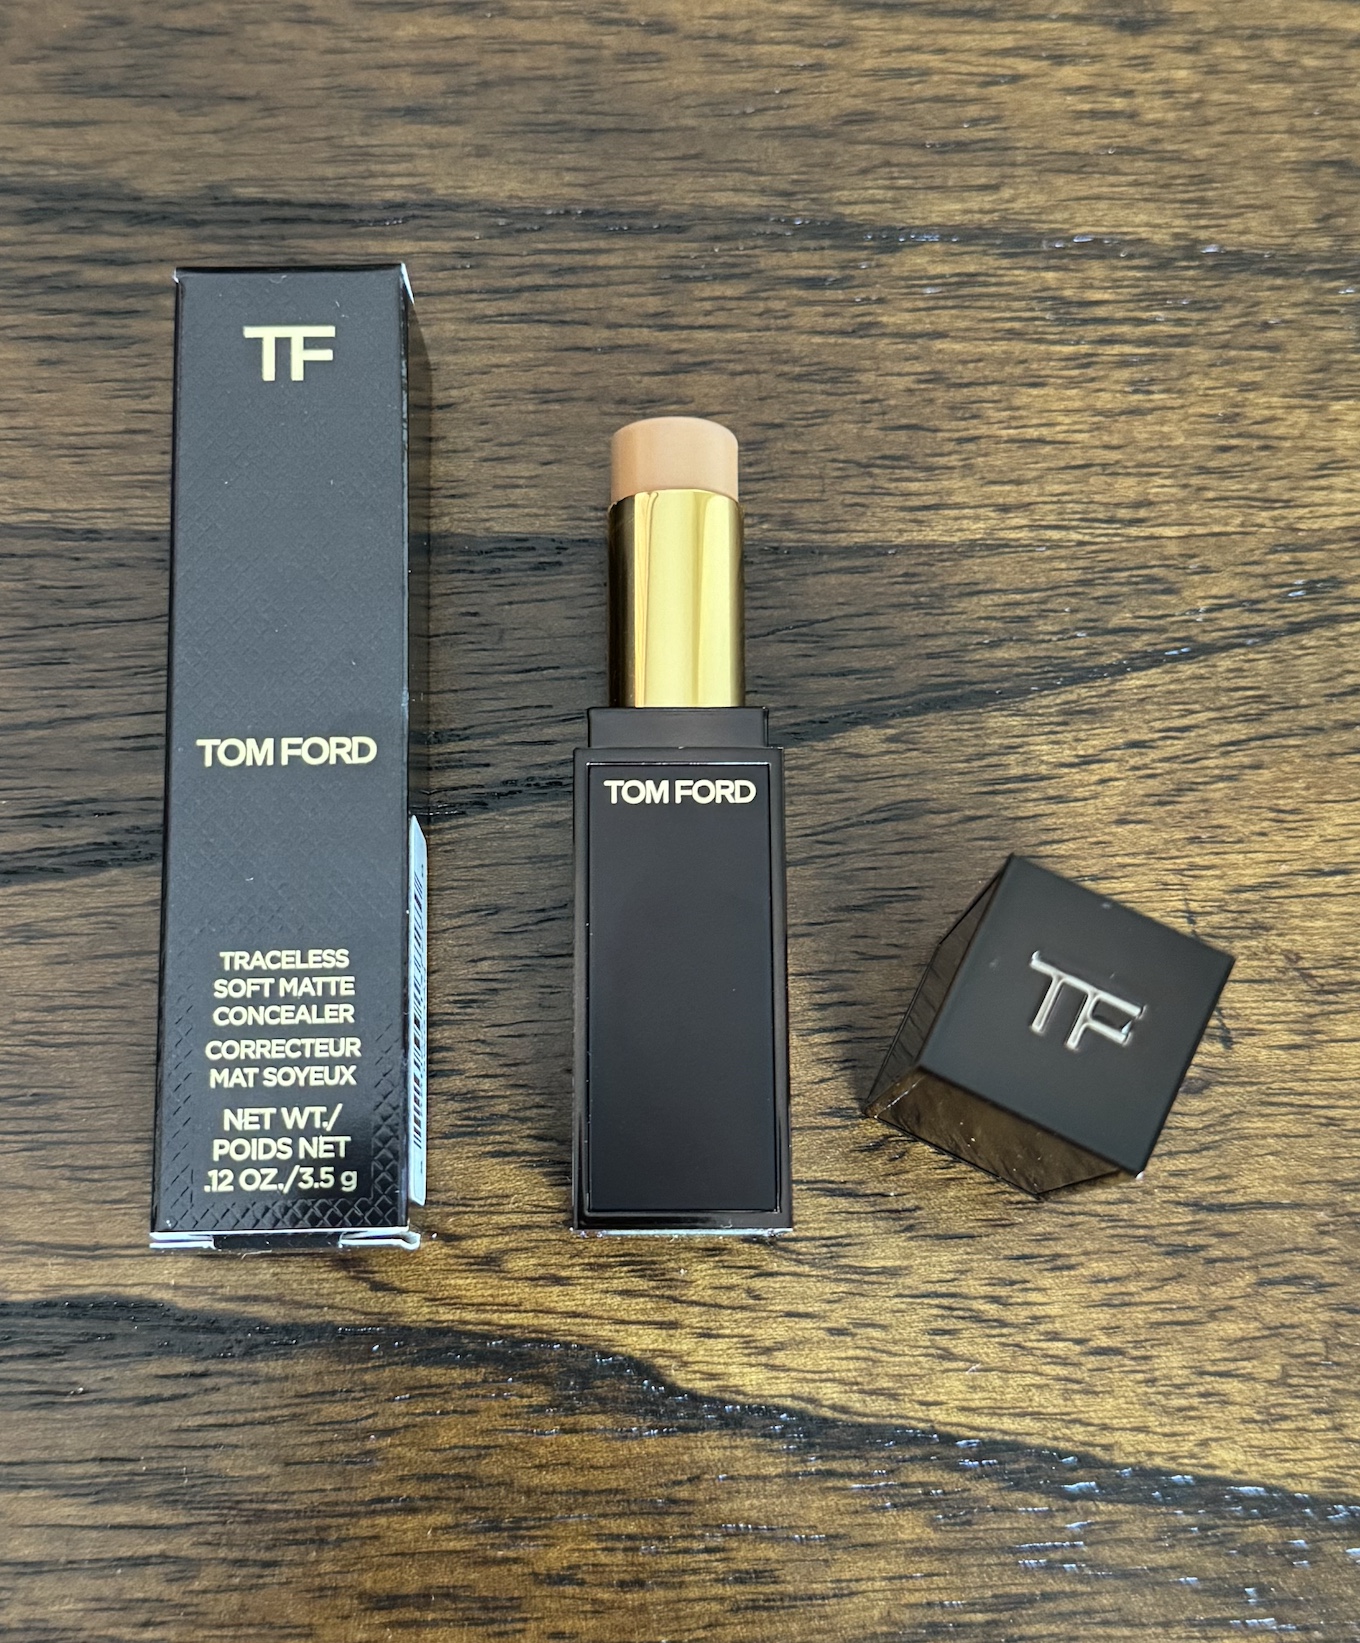 Tom Ford Traceless Soft Matte Concealer 5WO Tan Swatch